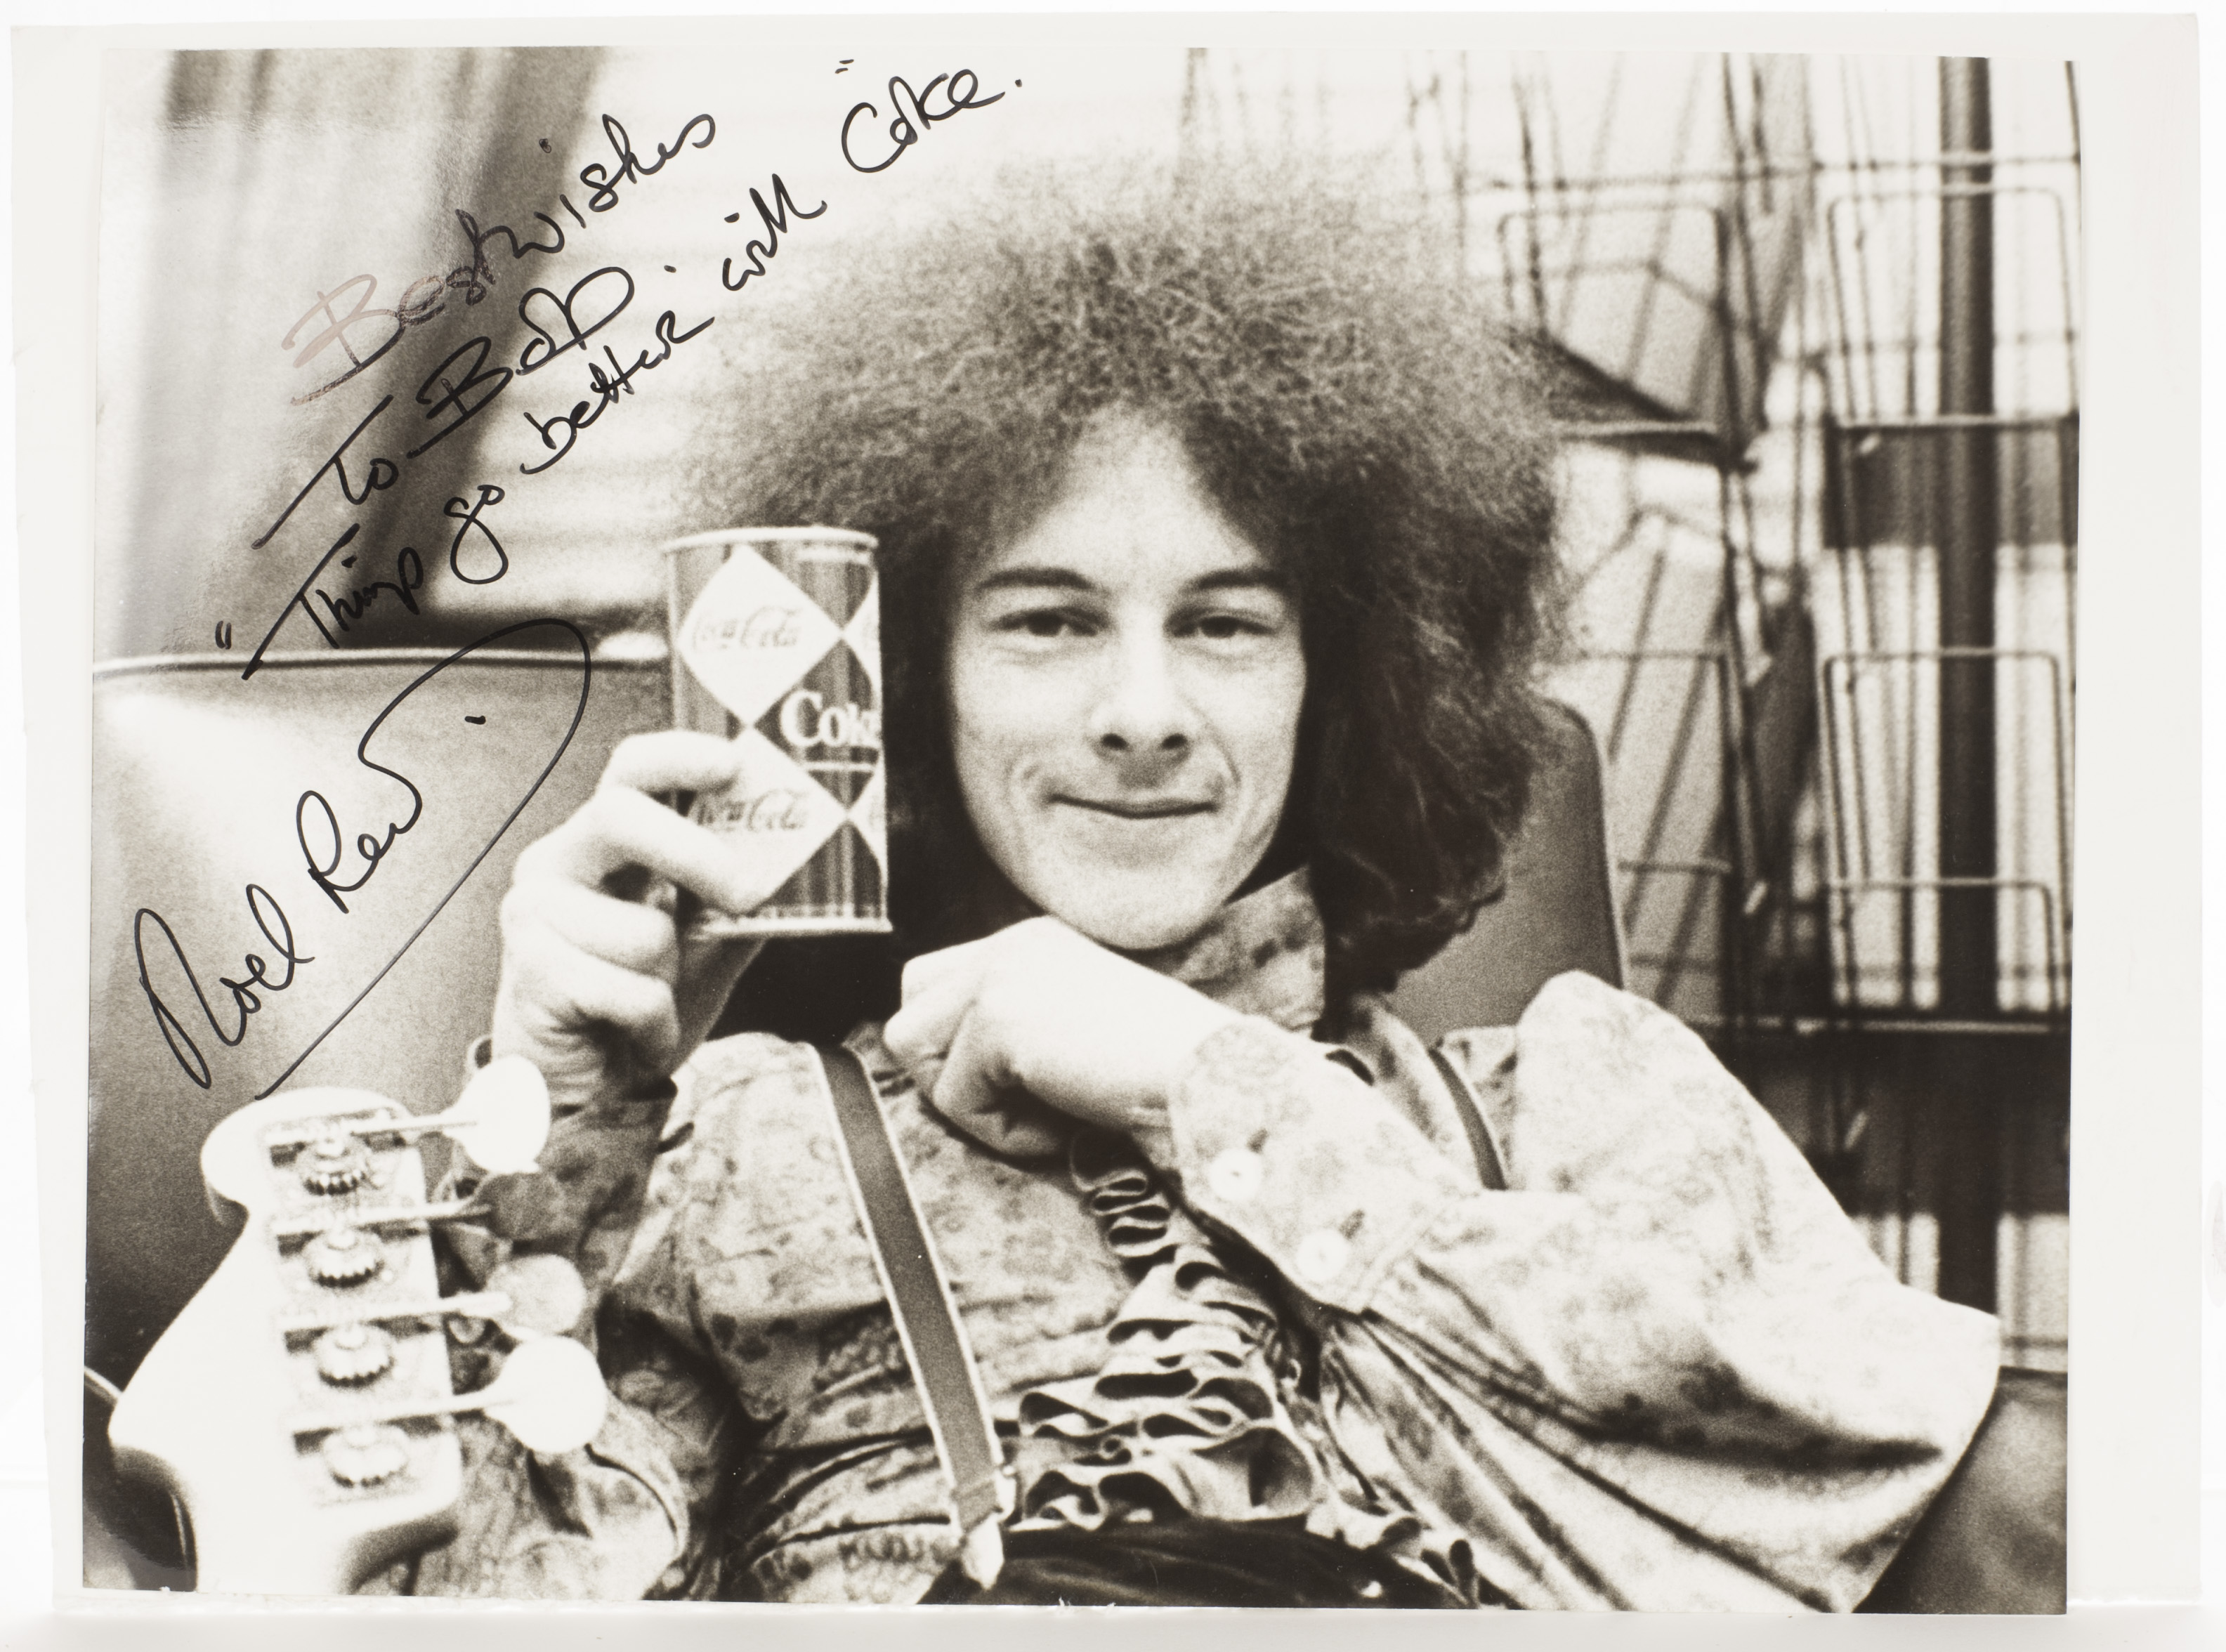 Jimi Hendrix Experience / Noel Redding: 11"x14" modern silver print with image of Noel holding a can